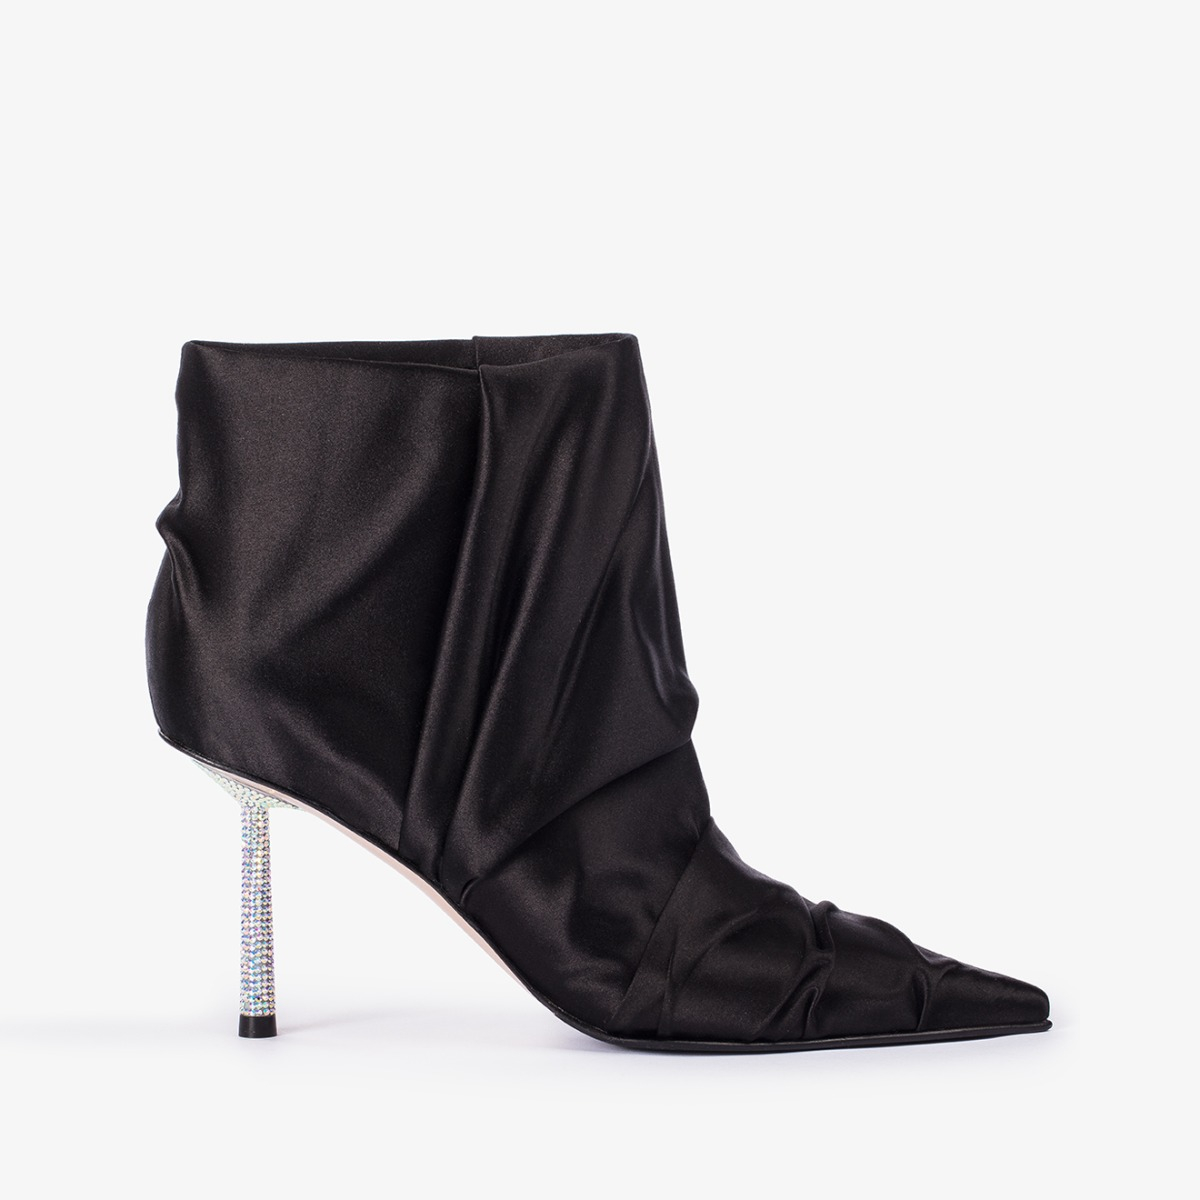 FEDRA ANKLE BOOT 80 mm - Le Silla official outlet